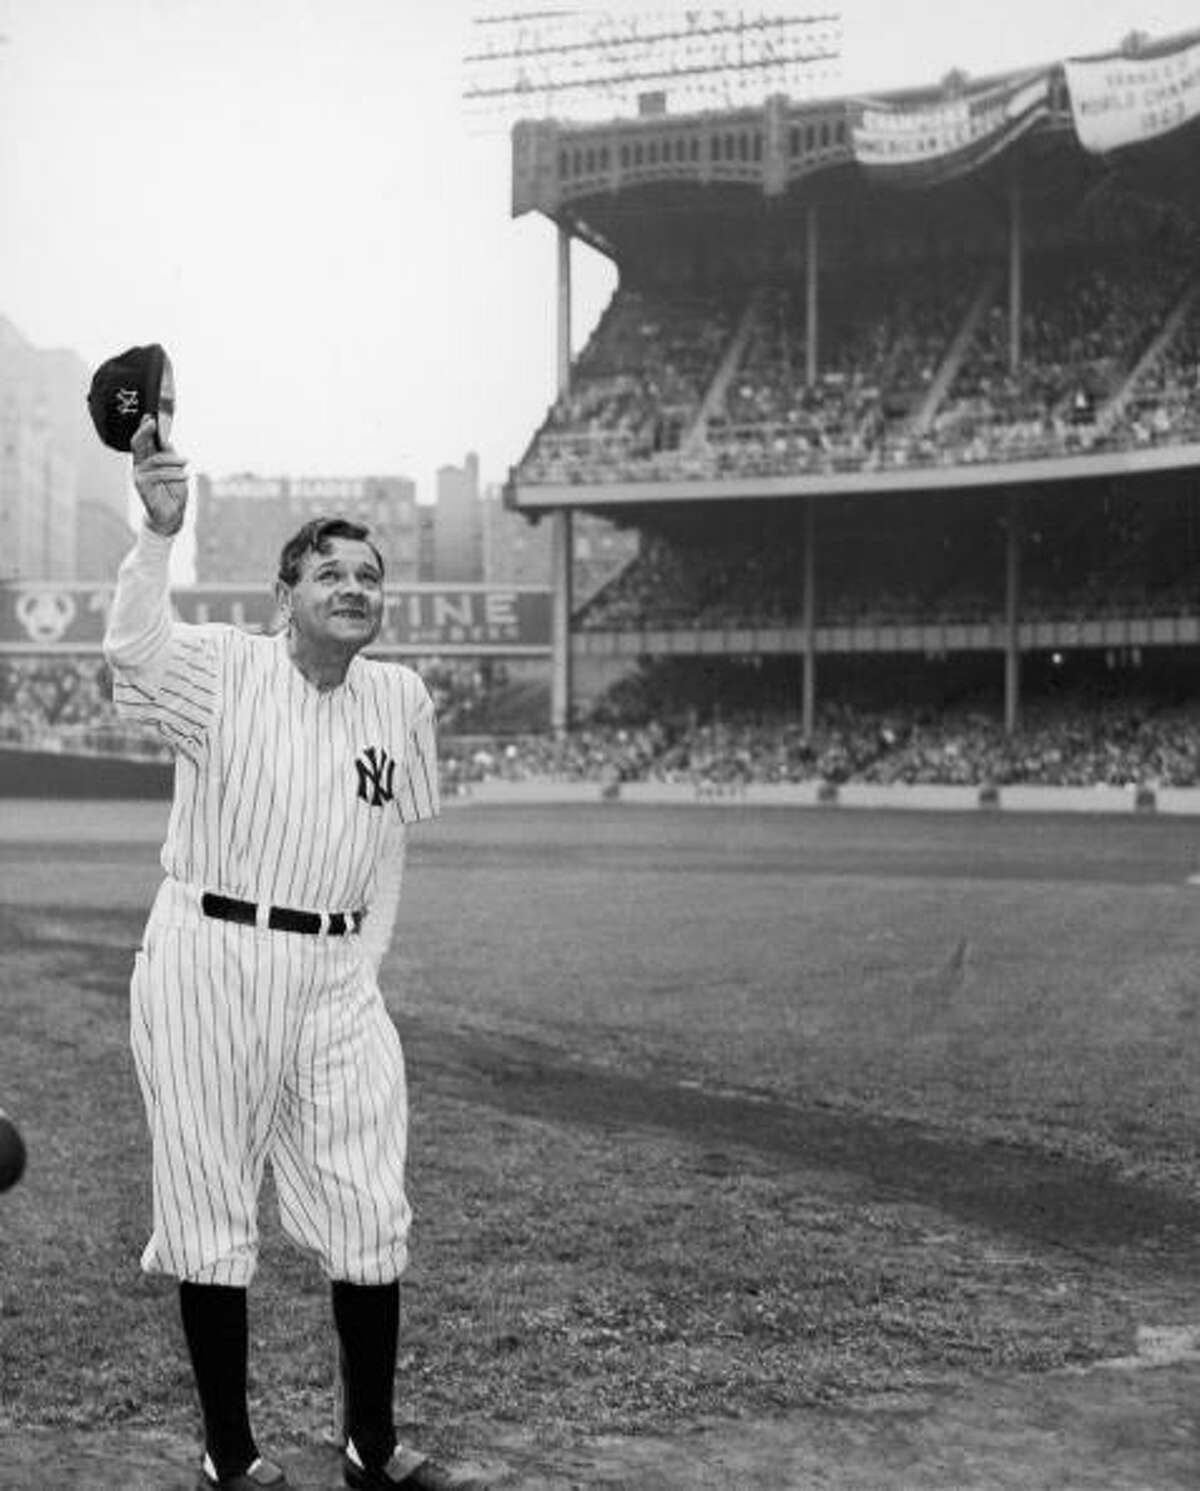 Babe Ruth Sold to Yankees